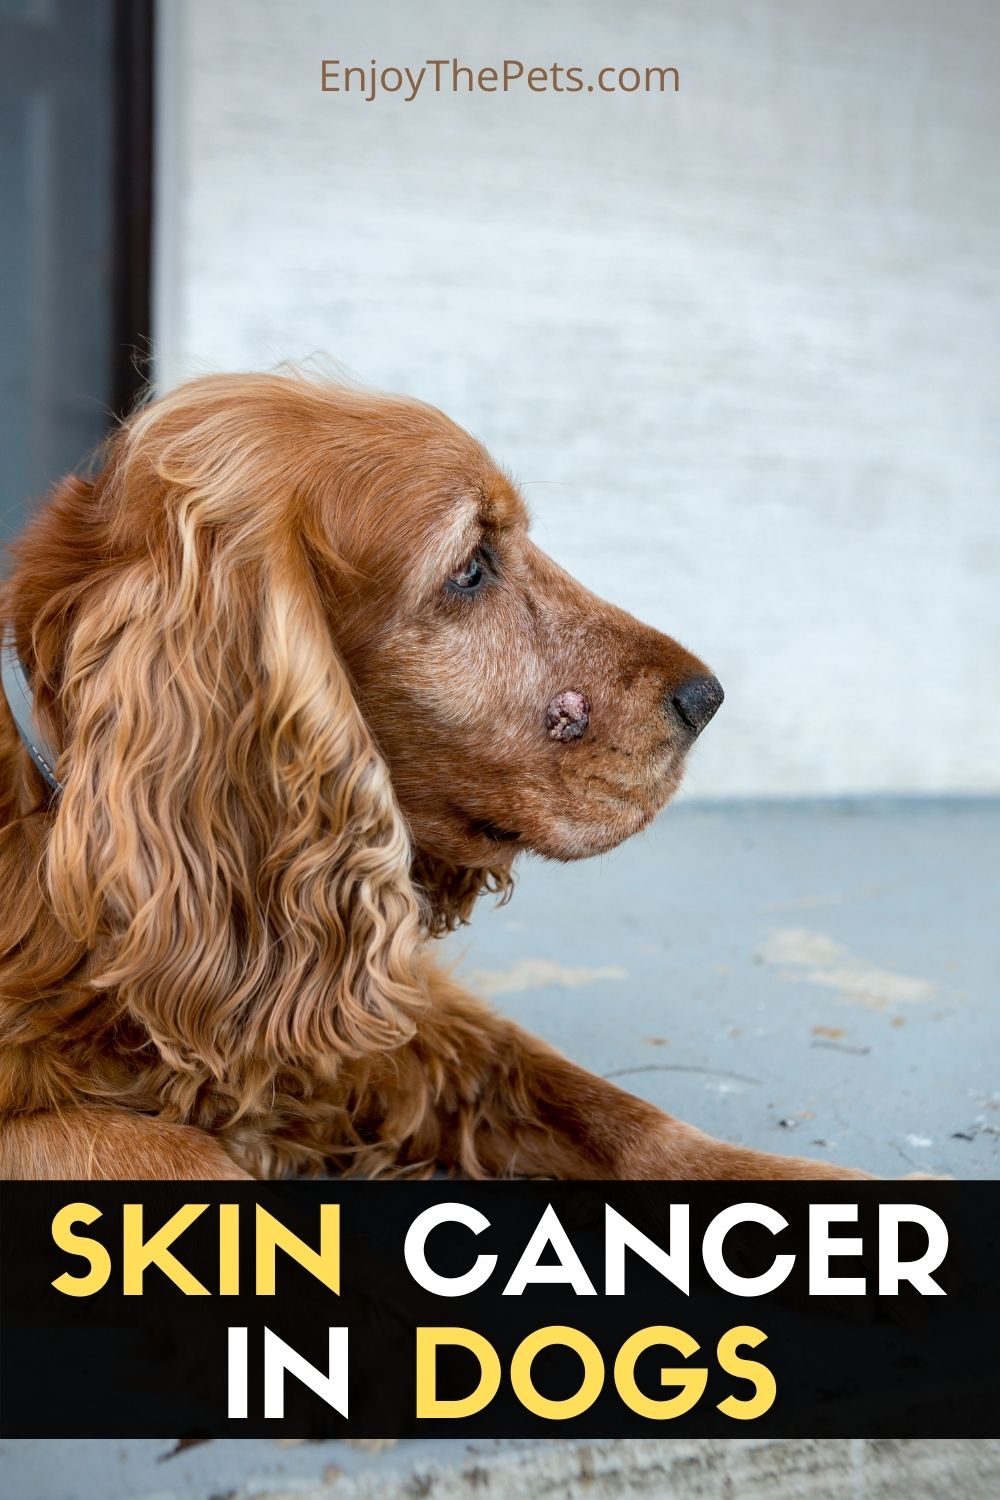 SKIN CANCER IN DOGS